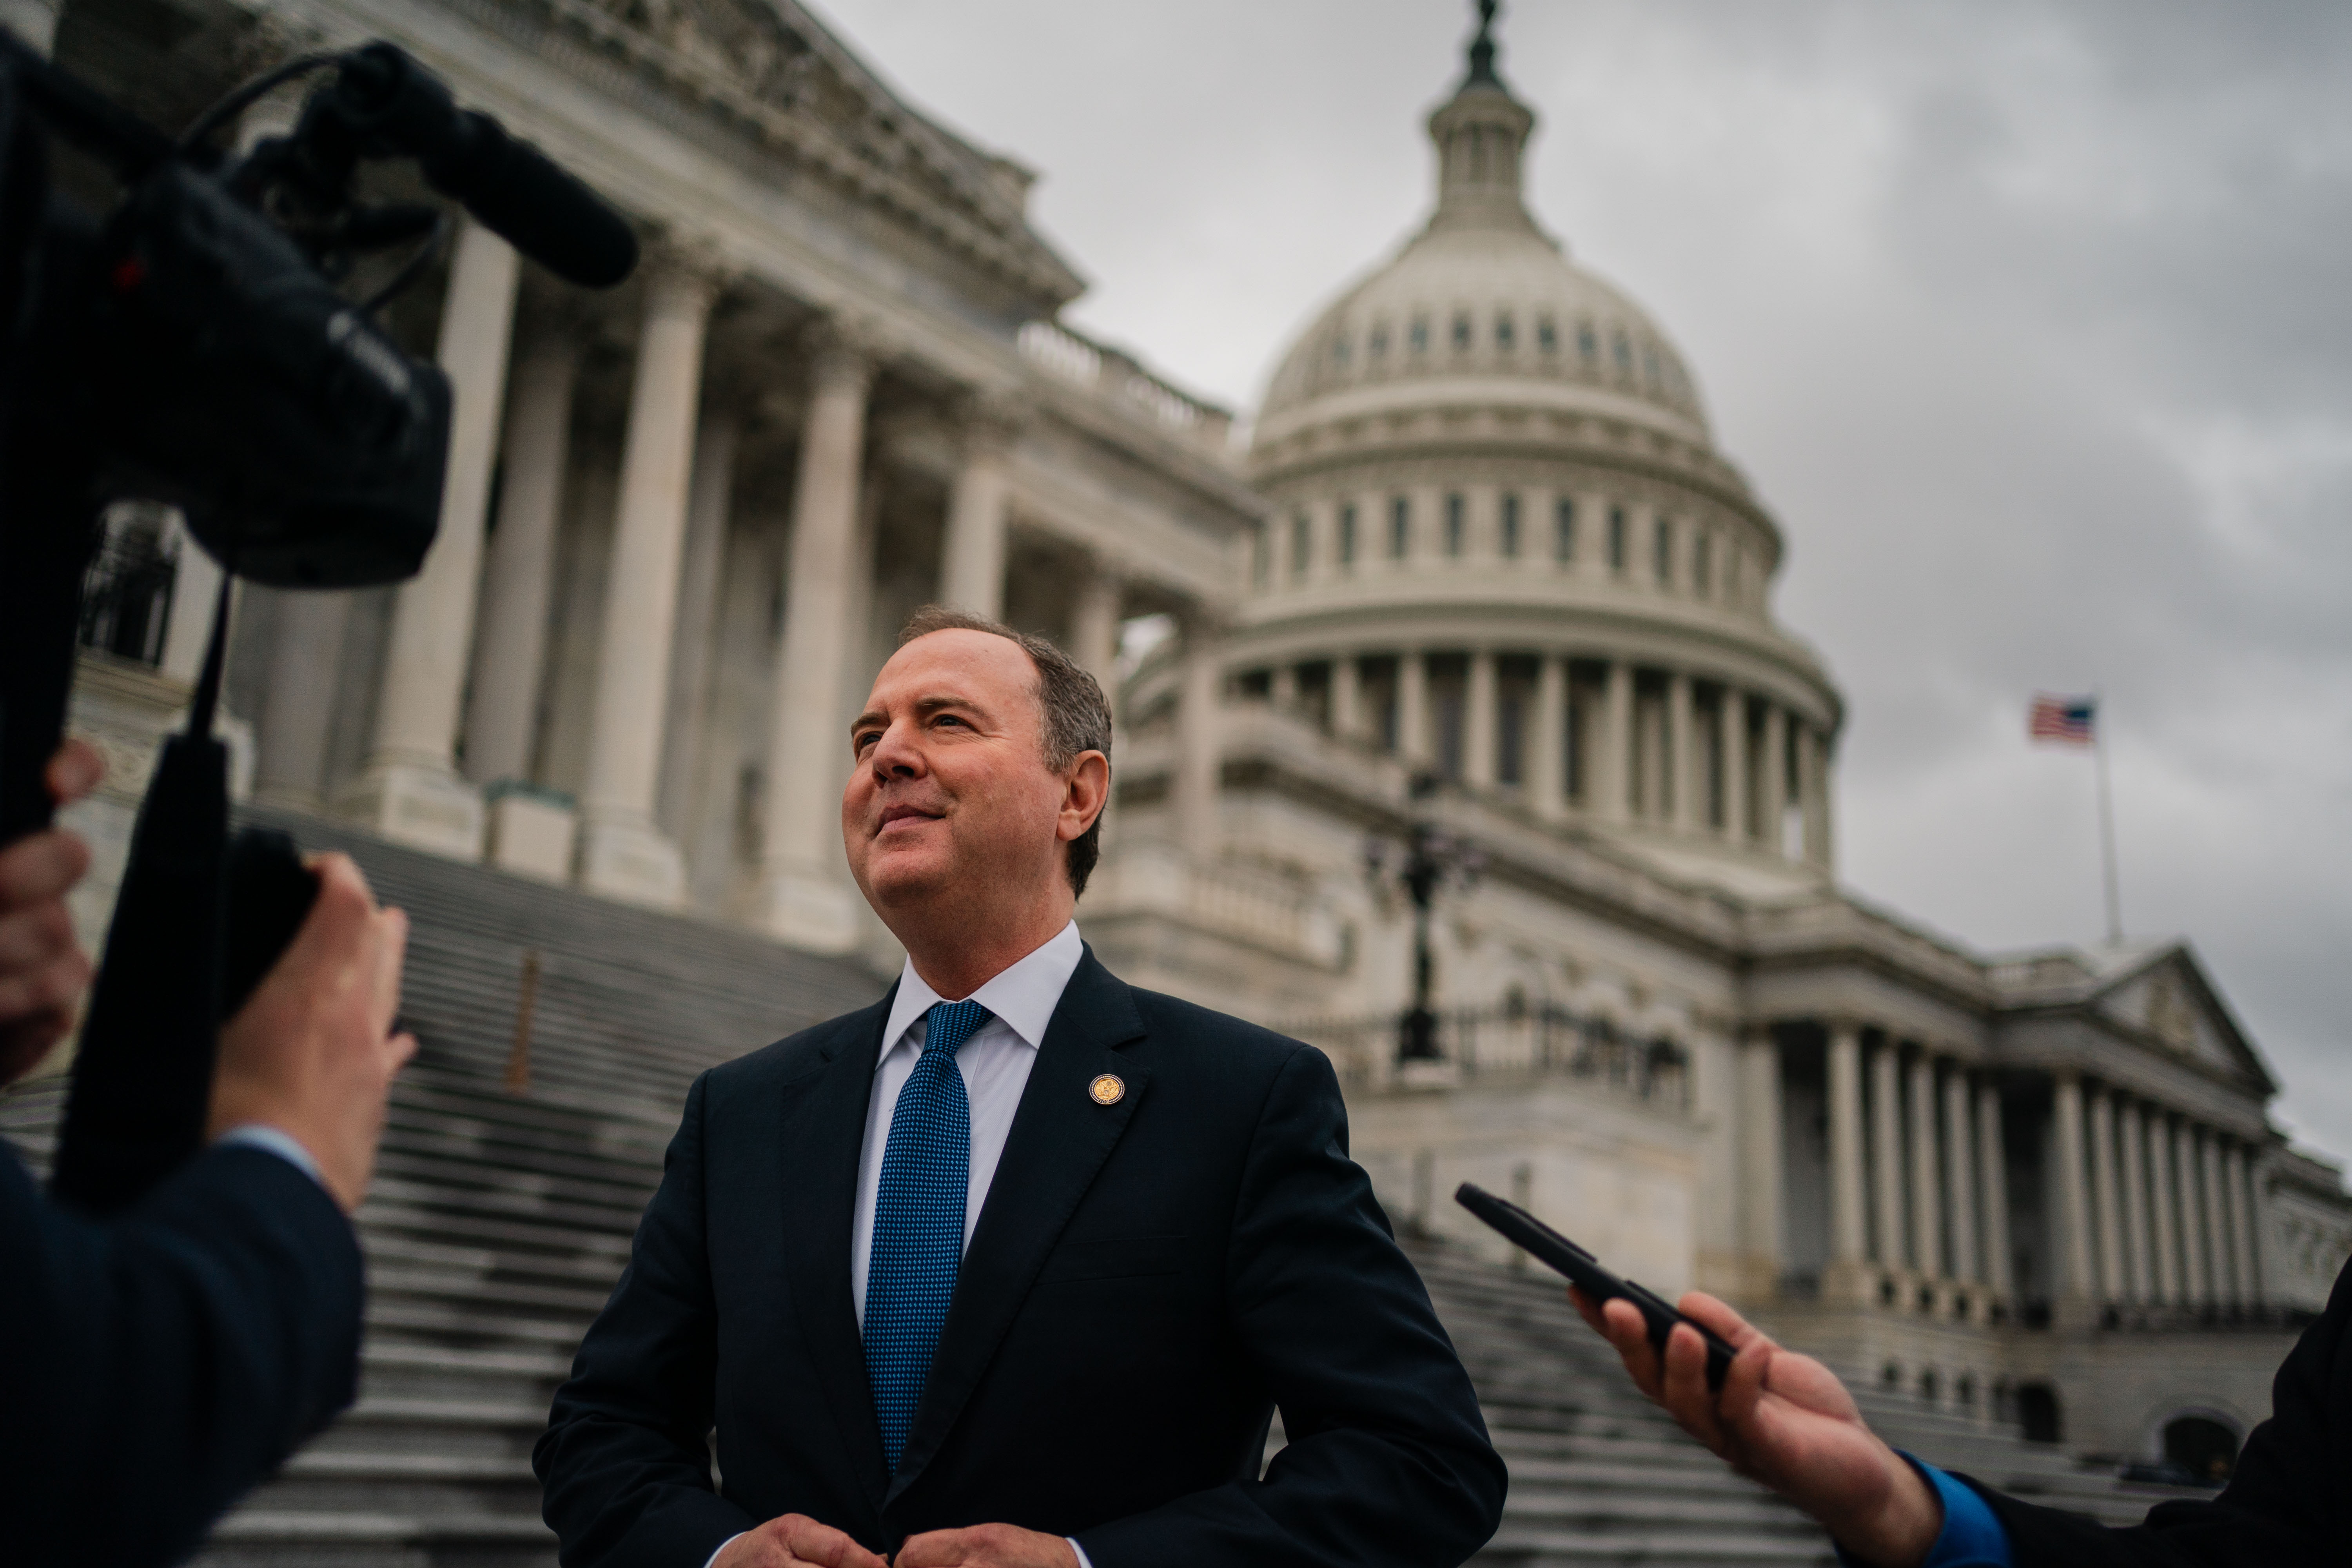 Adam Schiff on Capitol Hill with the Capitol dome in the background.